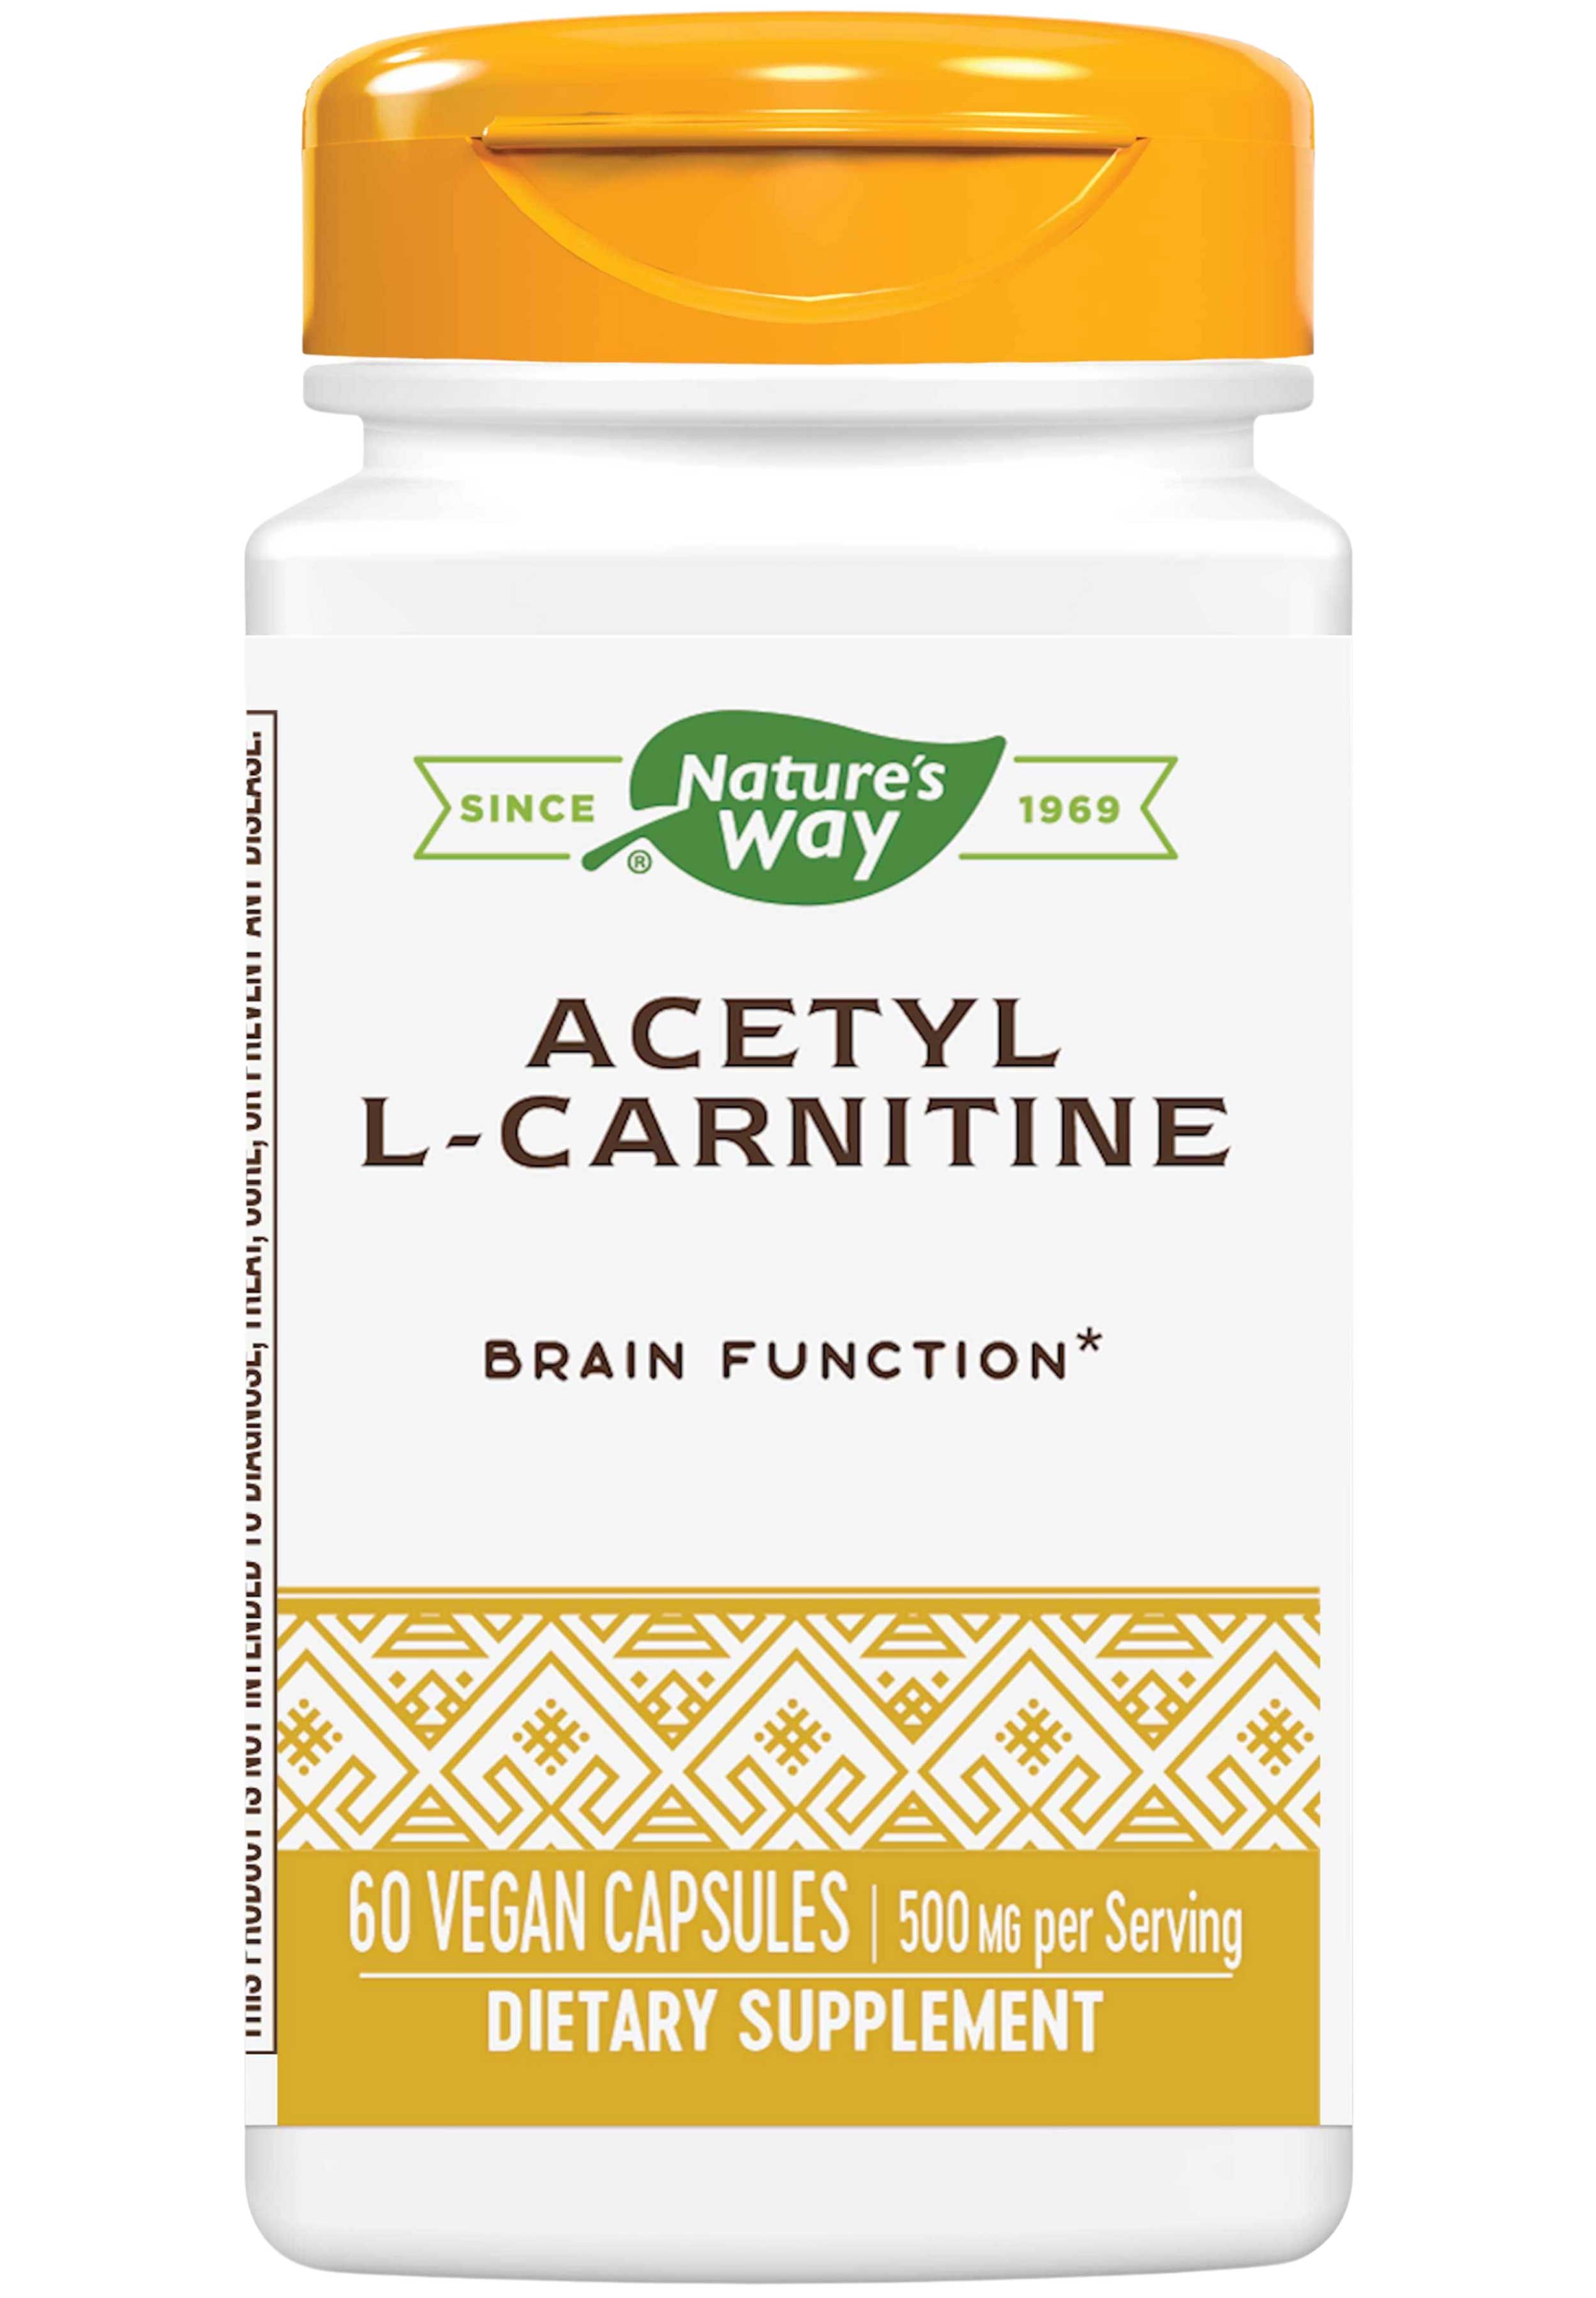 Nature's Way Acetyl L-Carnitine